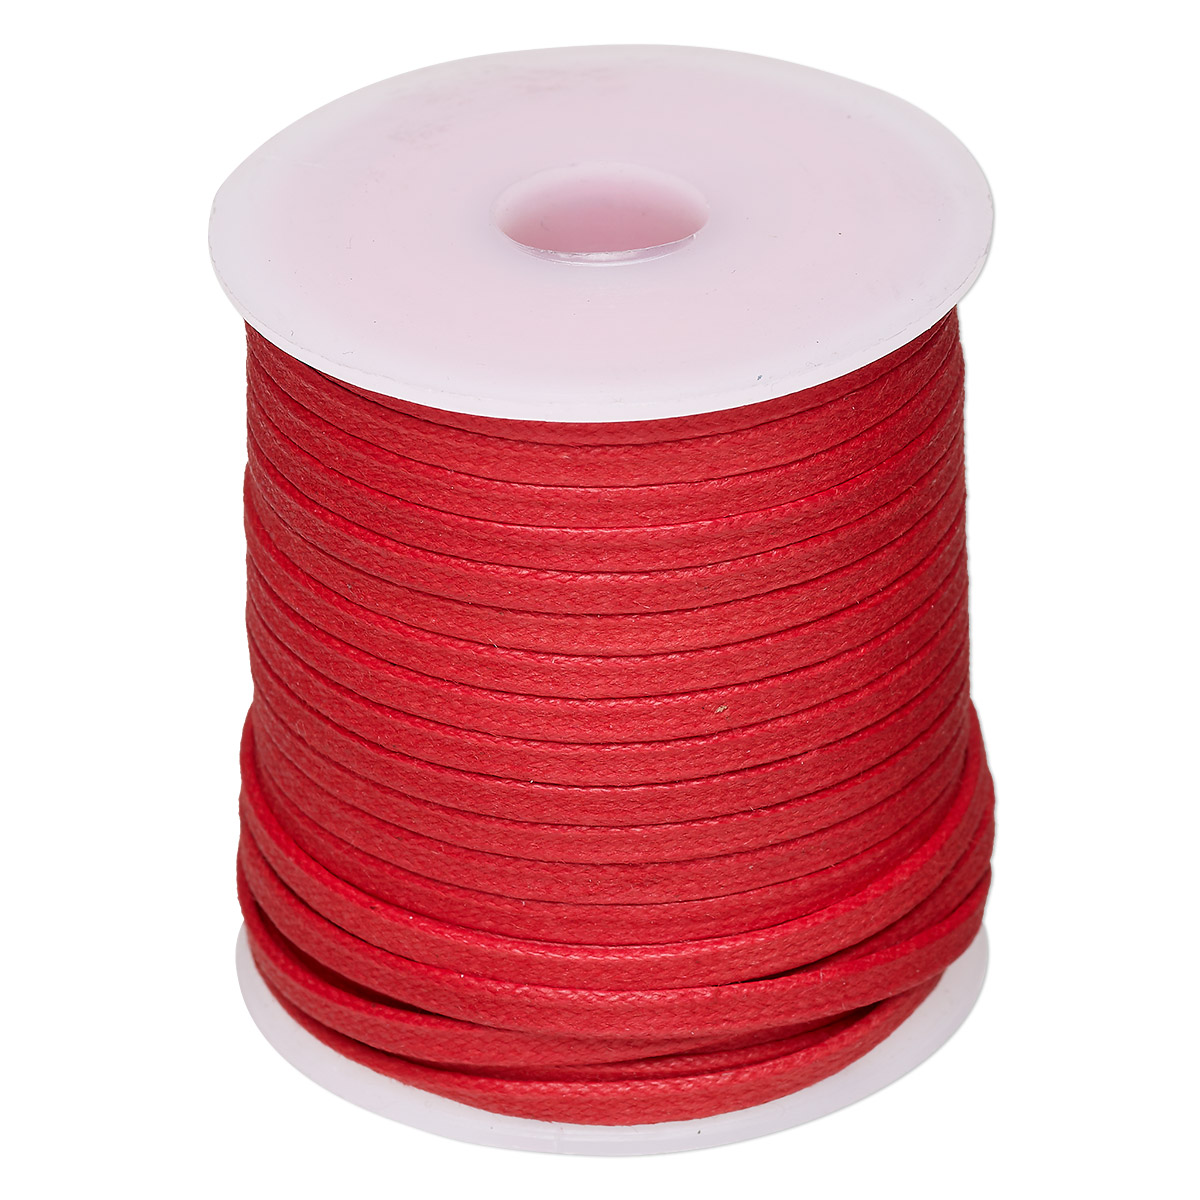 Cord, waxed cotton, red, 3mm flat. Sold per 25-meter spool. - Fire ...